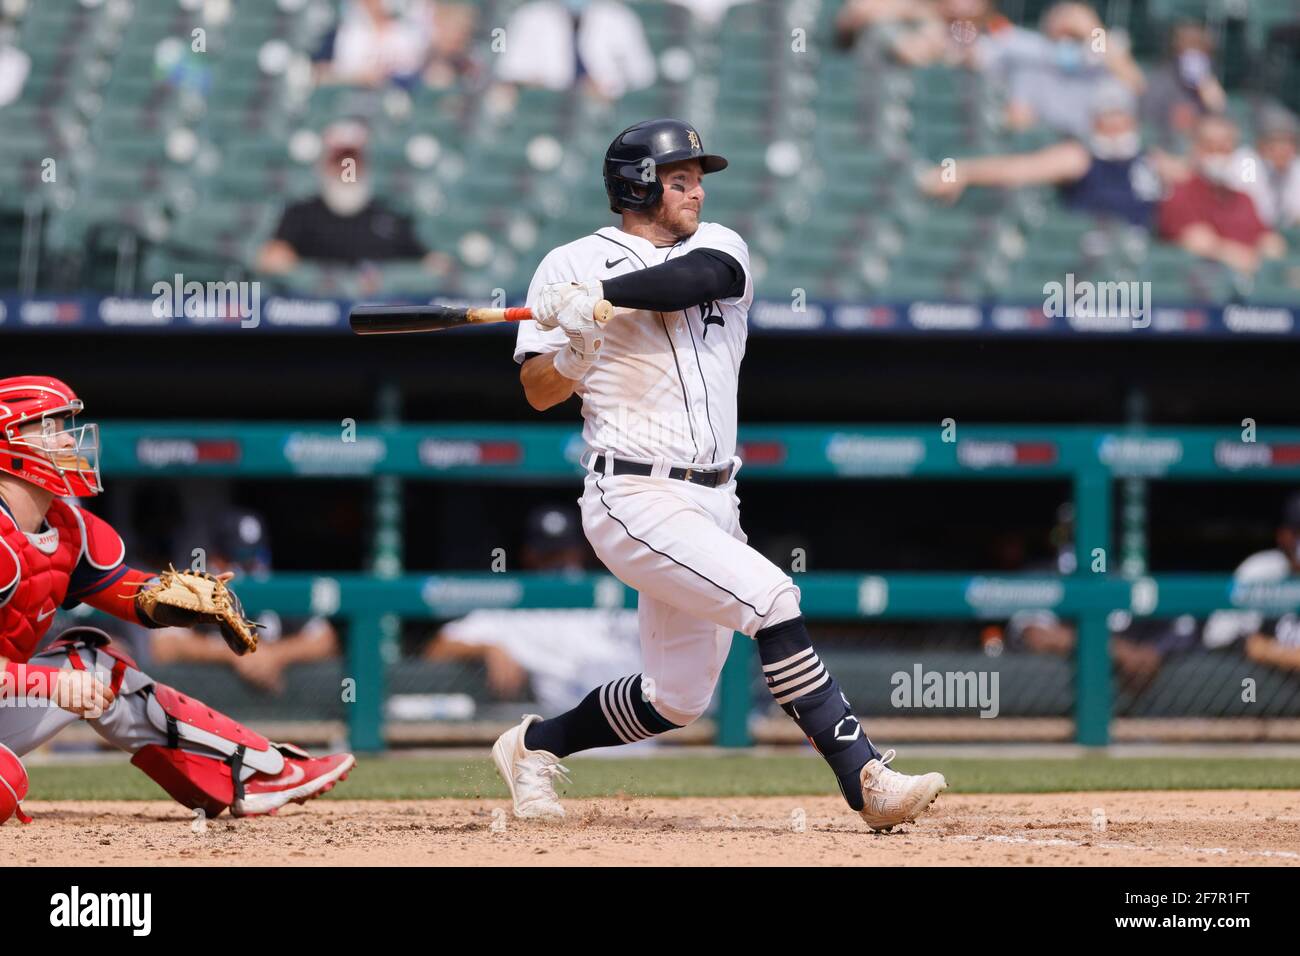 DETROIT, MI - APRIL 6: Robbie Grossman (8) of the Detroit Tigers bats during a game against the Minnesota Twins at Comerica Park on April 6, 2021 in D Stock Photo